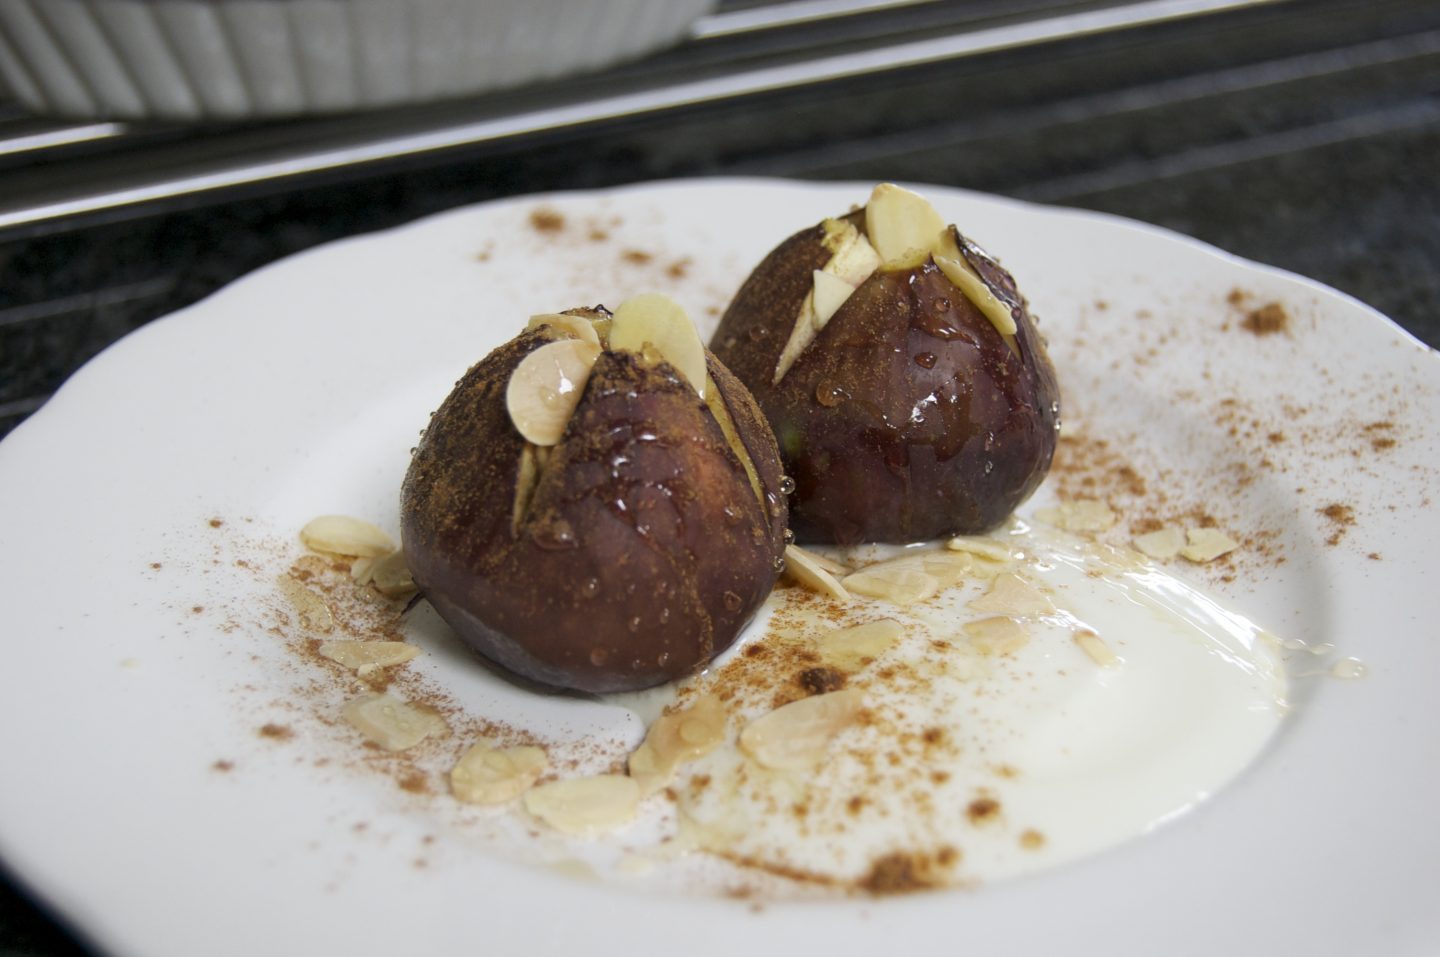 Baked Sweet Figs with Yoghurt